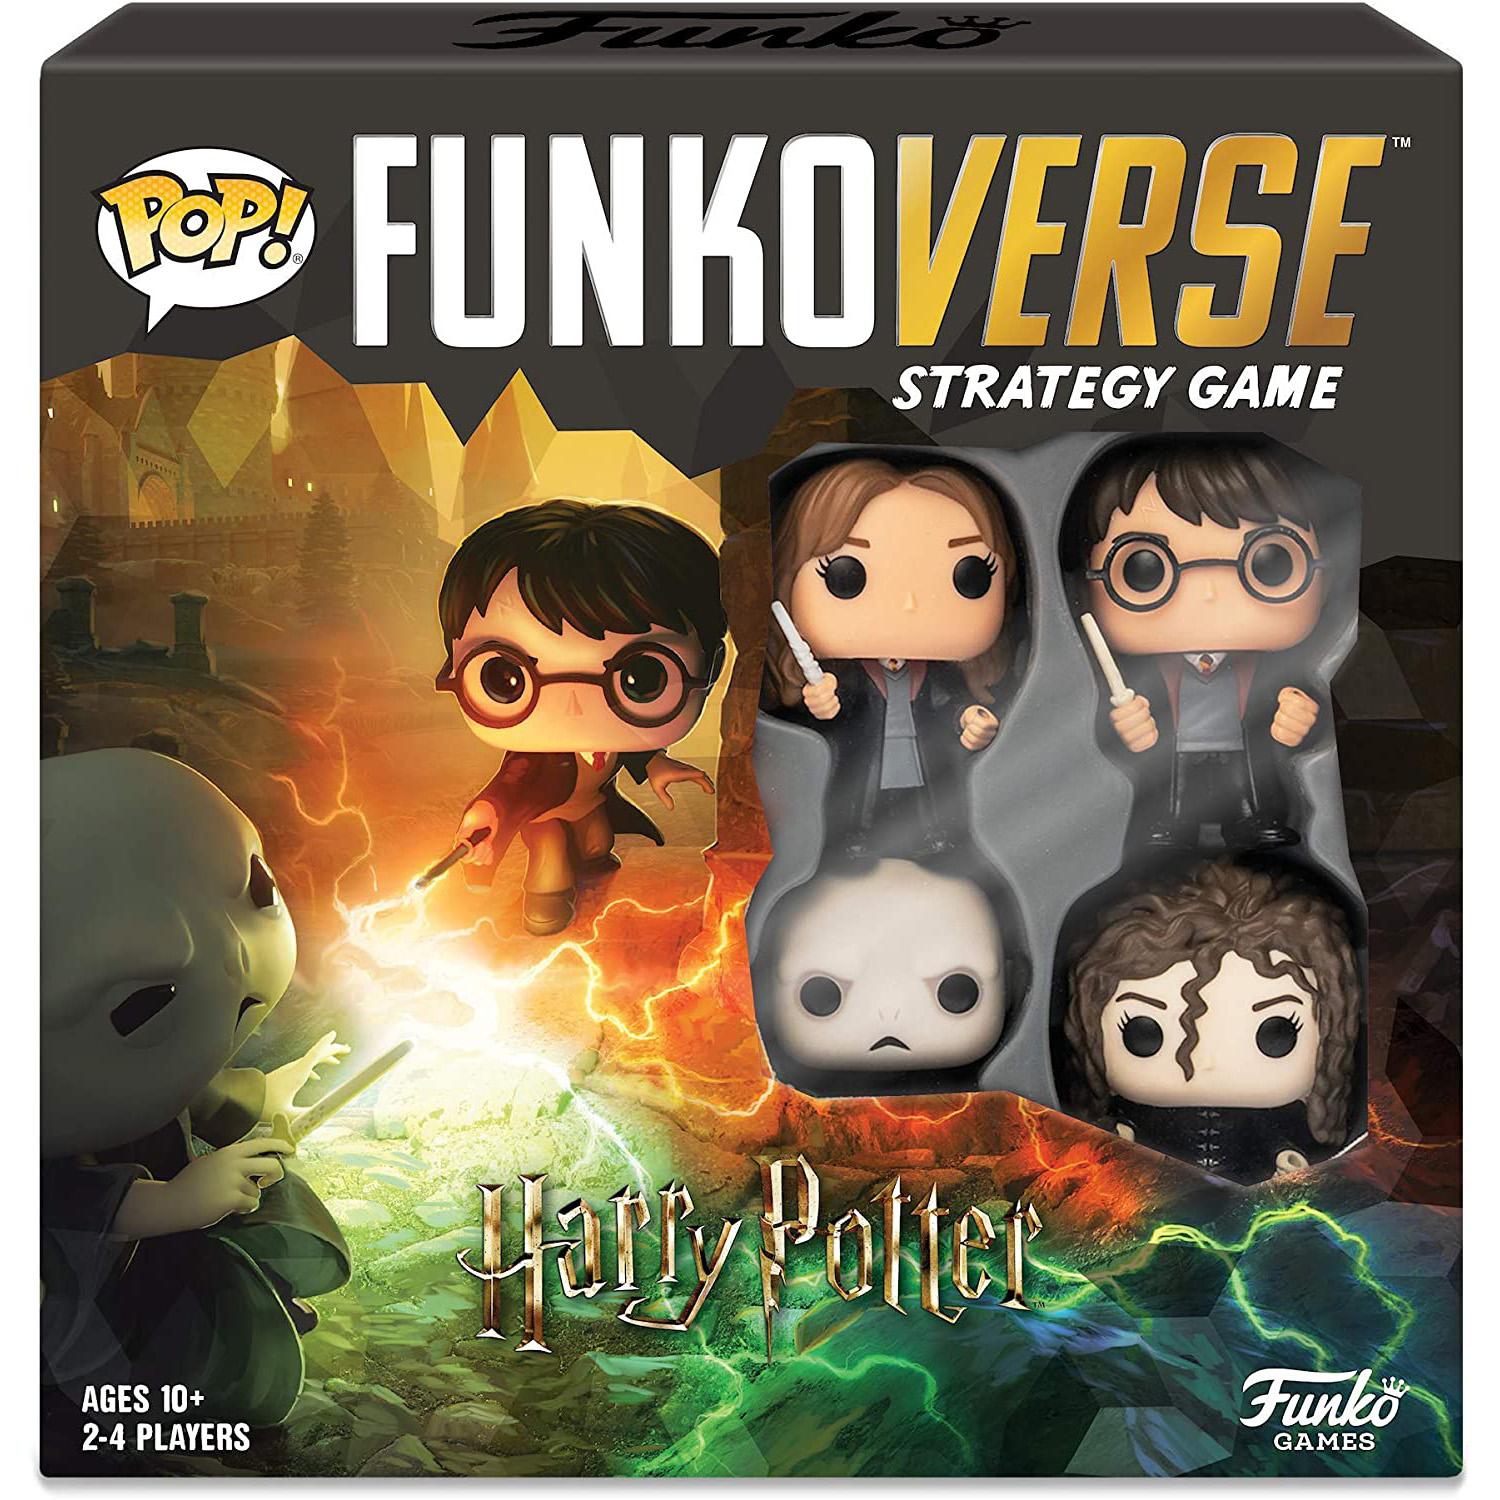 Funko Pop Funkoverse Strategy Game Harry Potter for $13.48